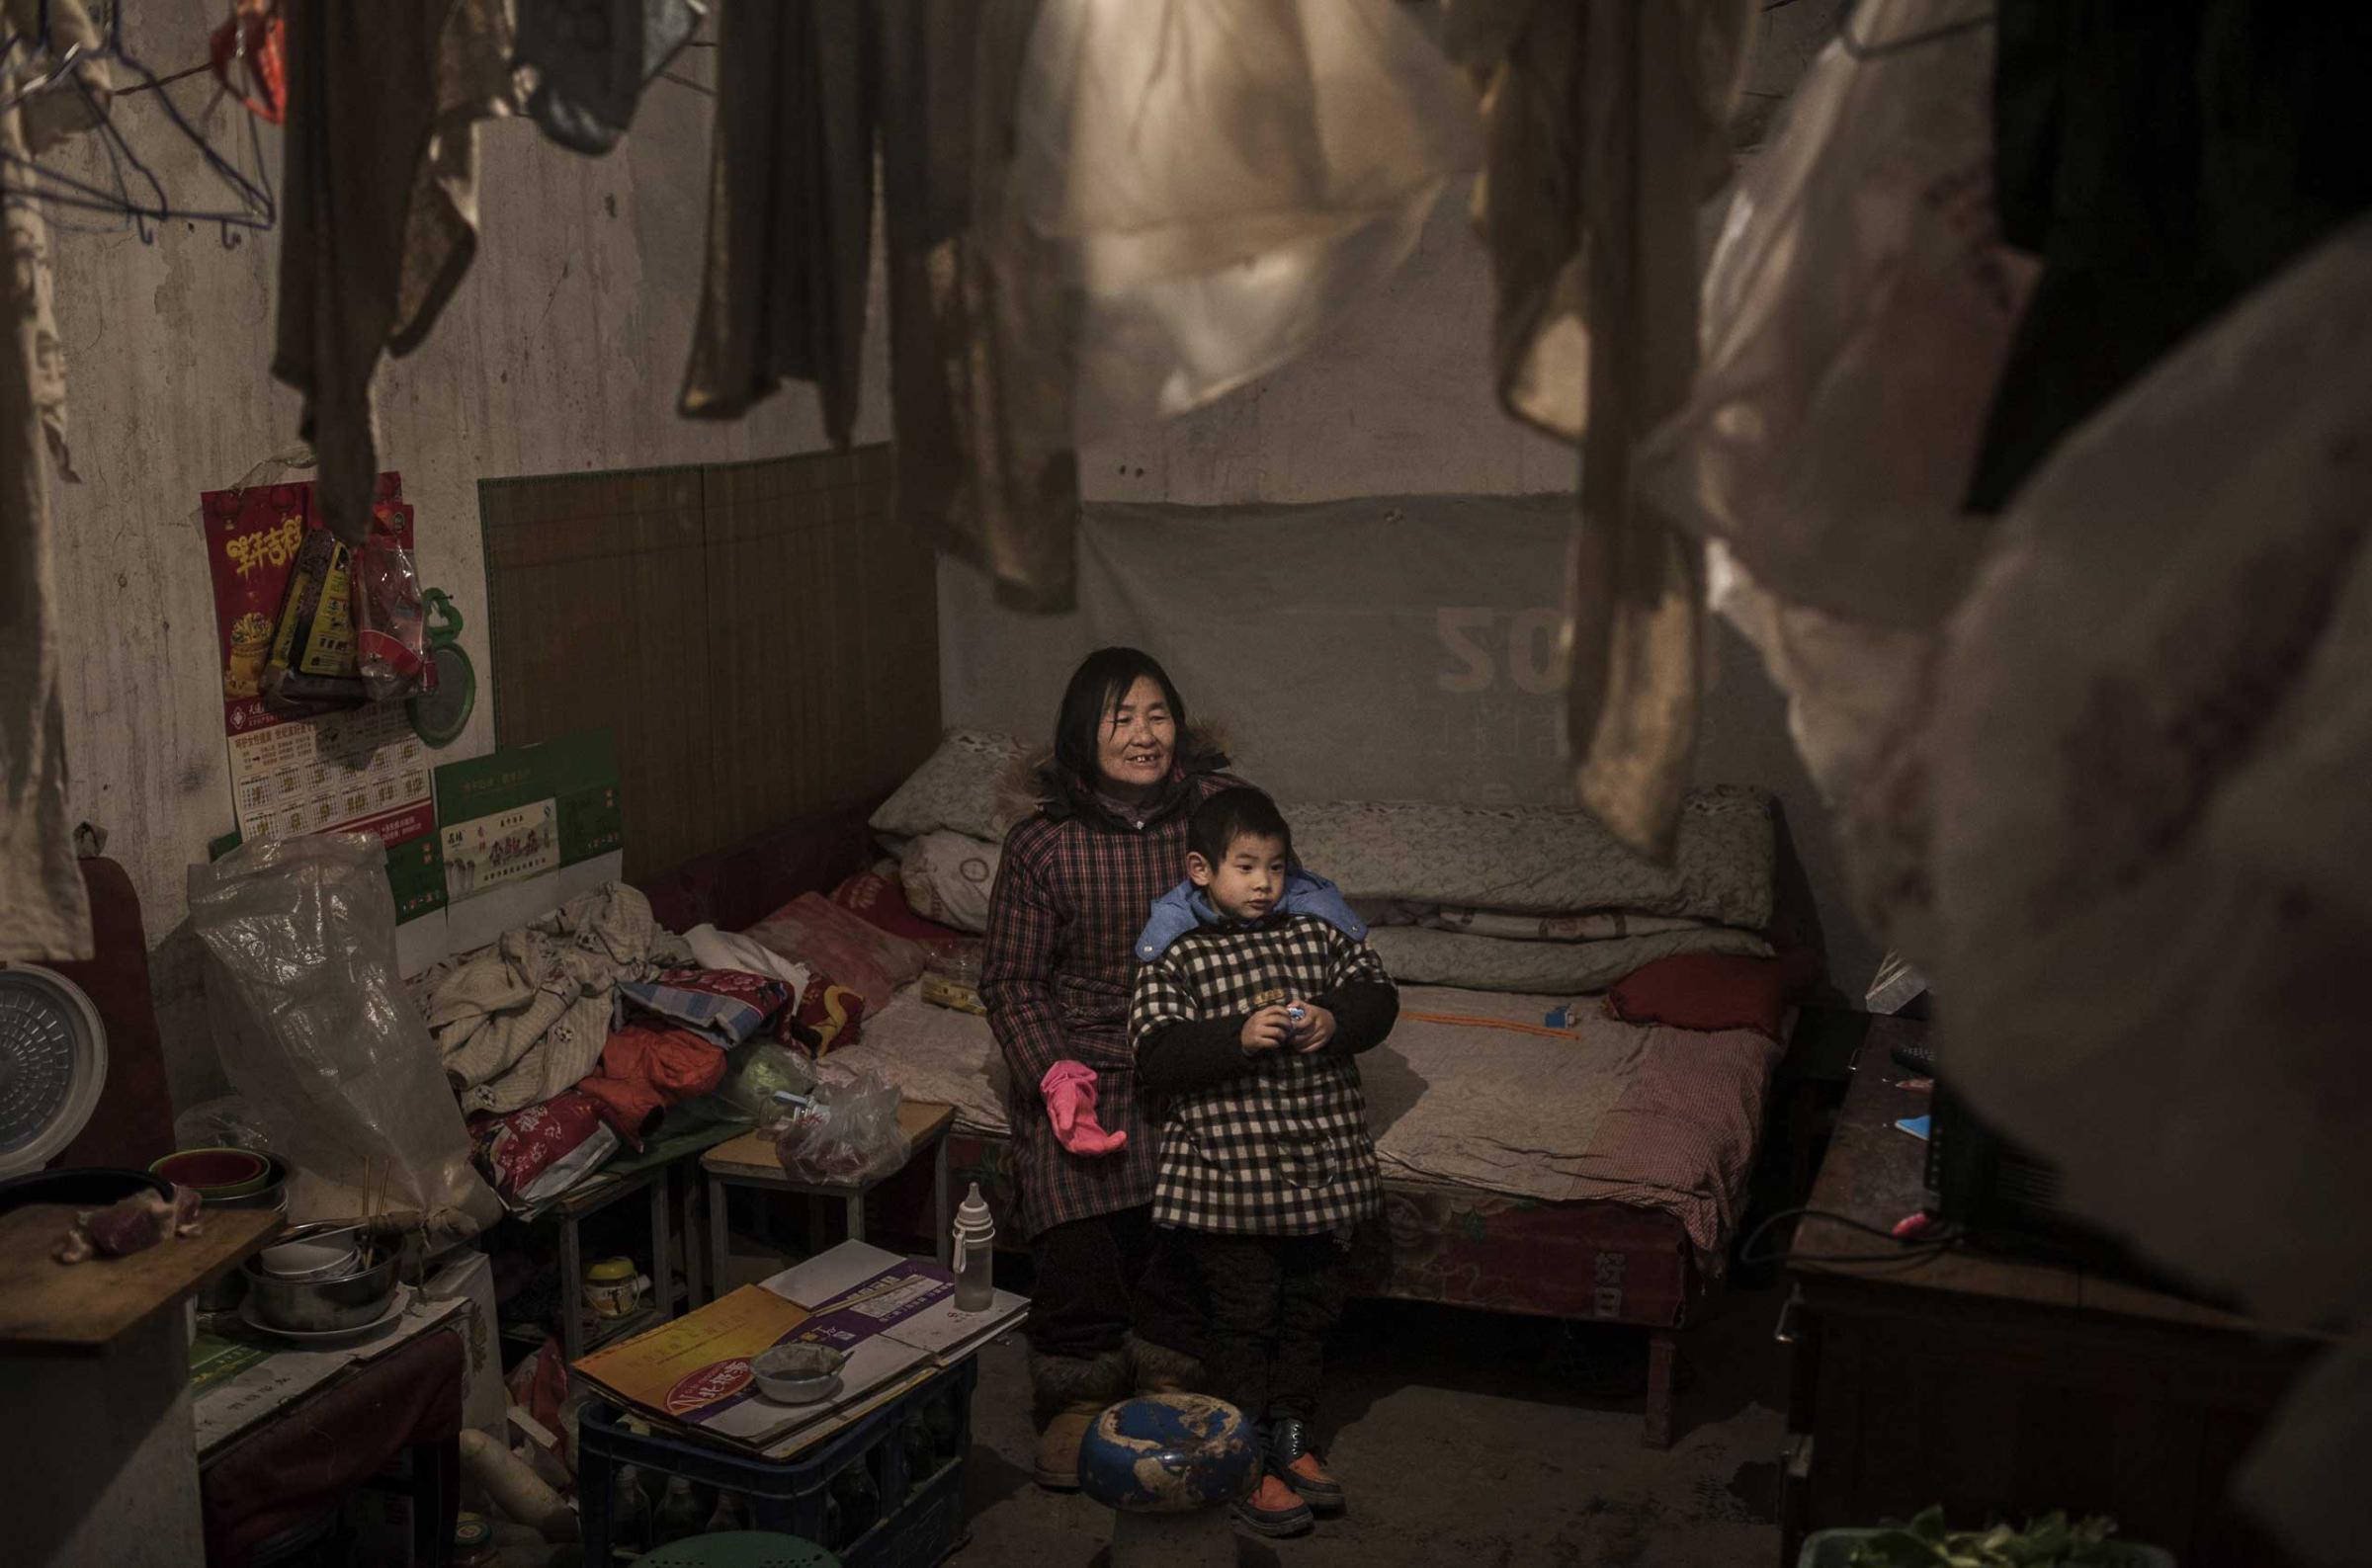 A laborer watches television with her grandson in the Dong Xiao Kou scrap village on Dec. 11, 2014 in Beijing.